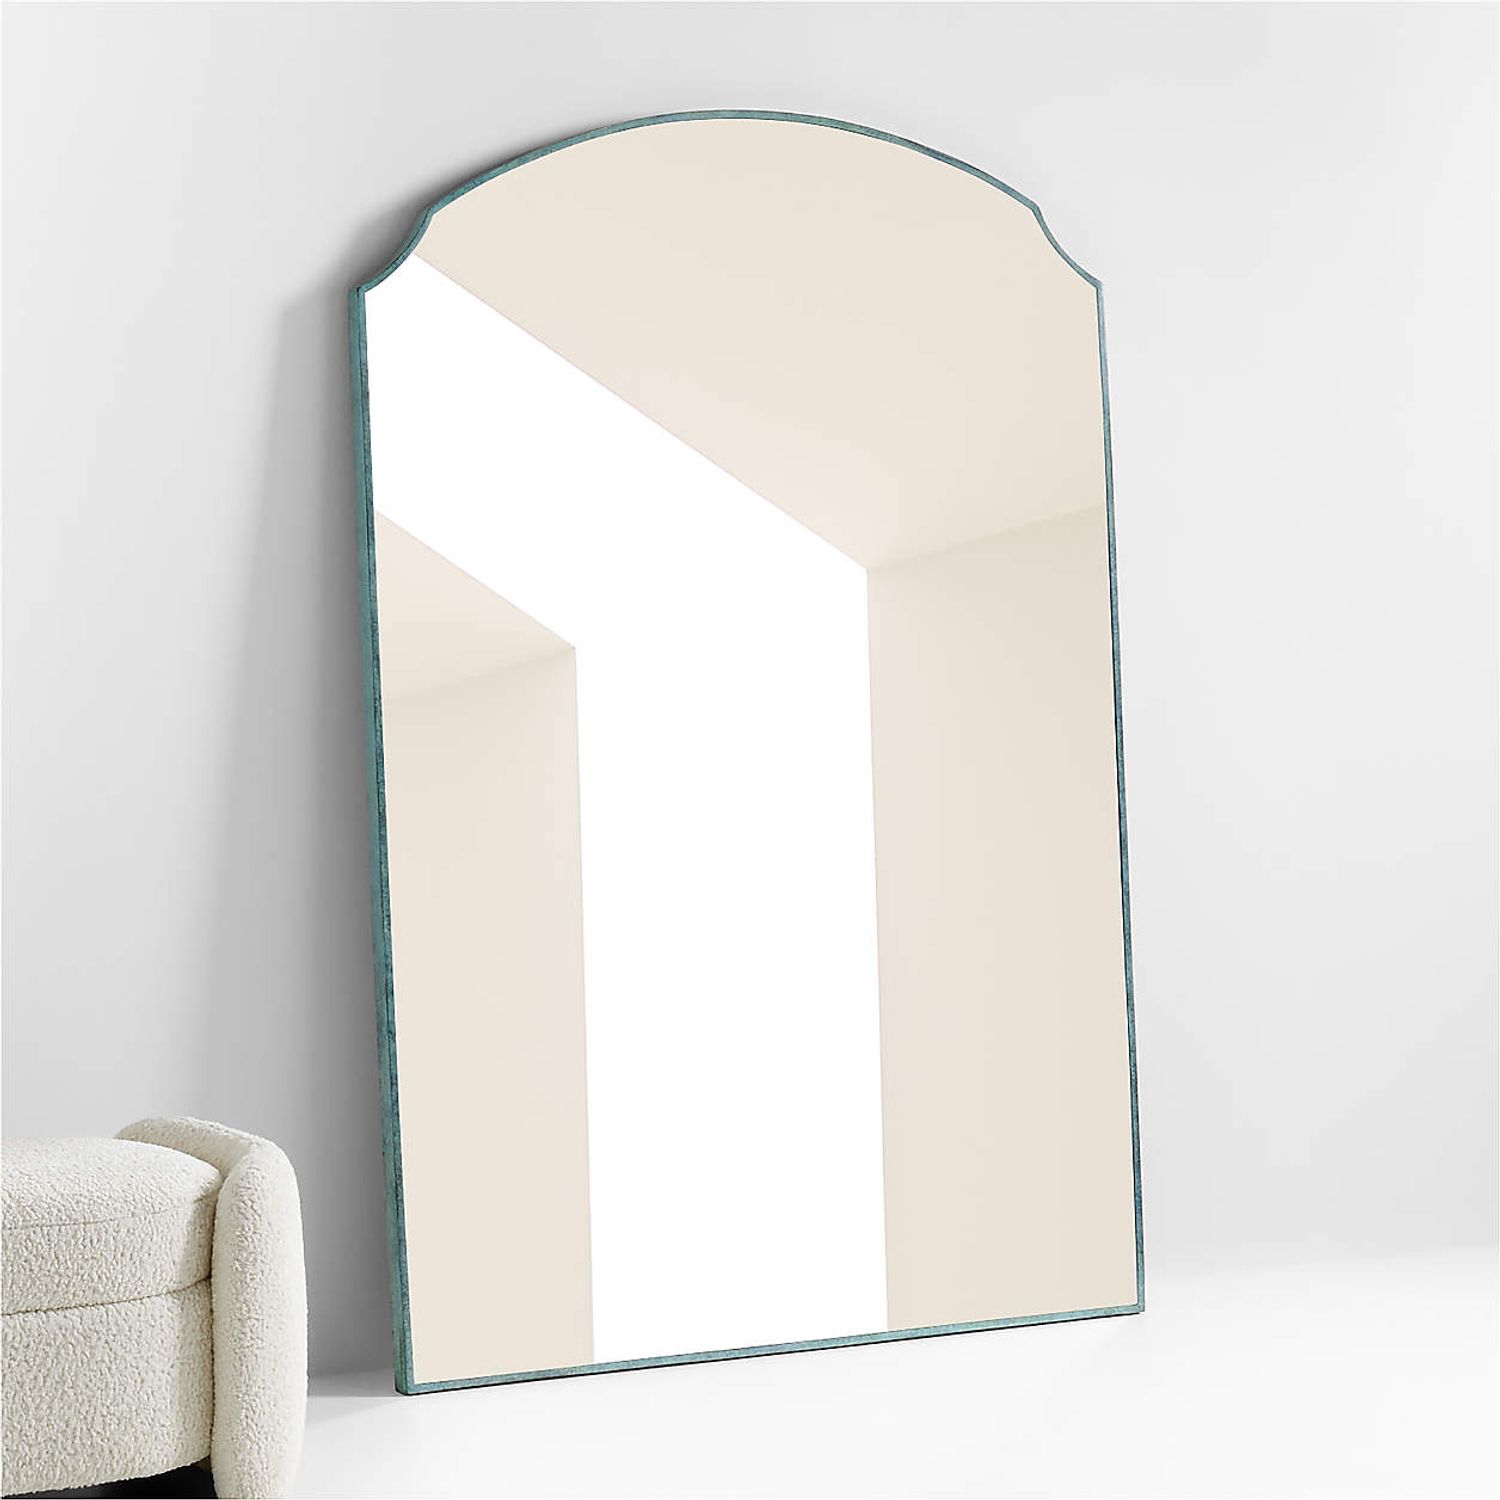 Shop Emmy Patina Copper Floor Mirror from Crate and Barrel on Openhaus